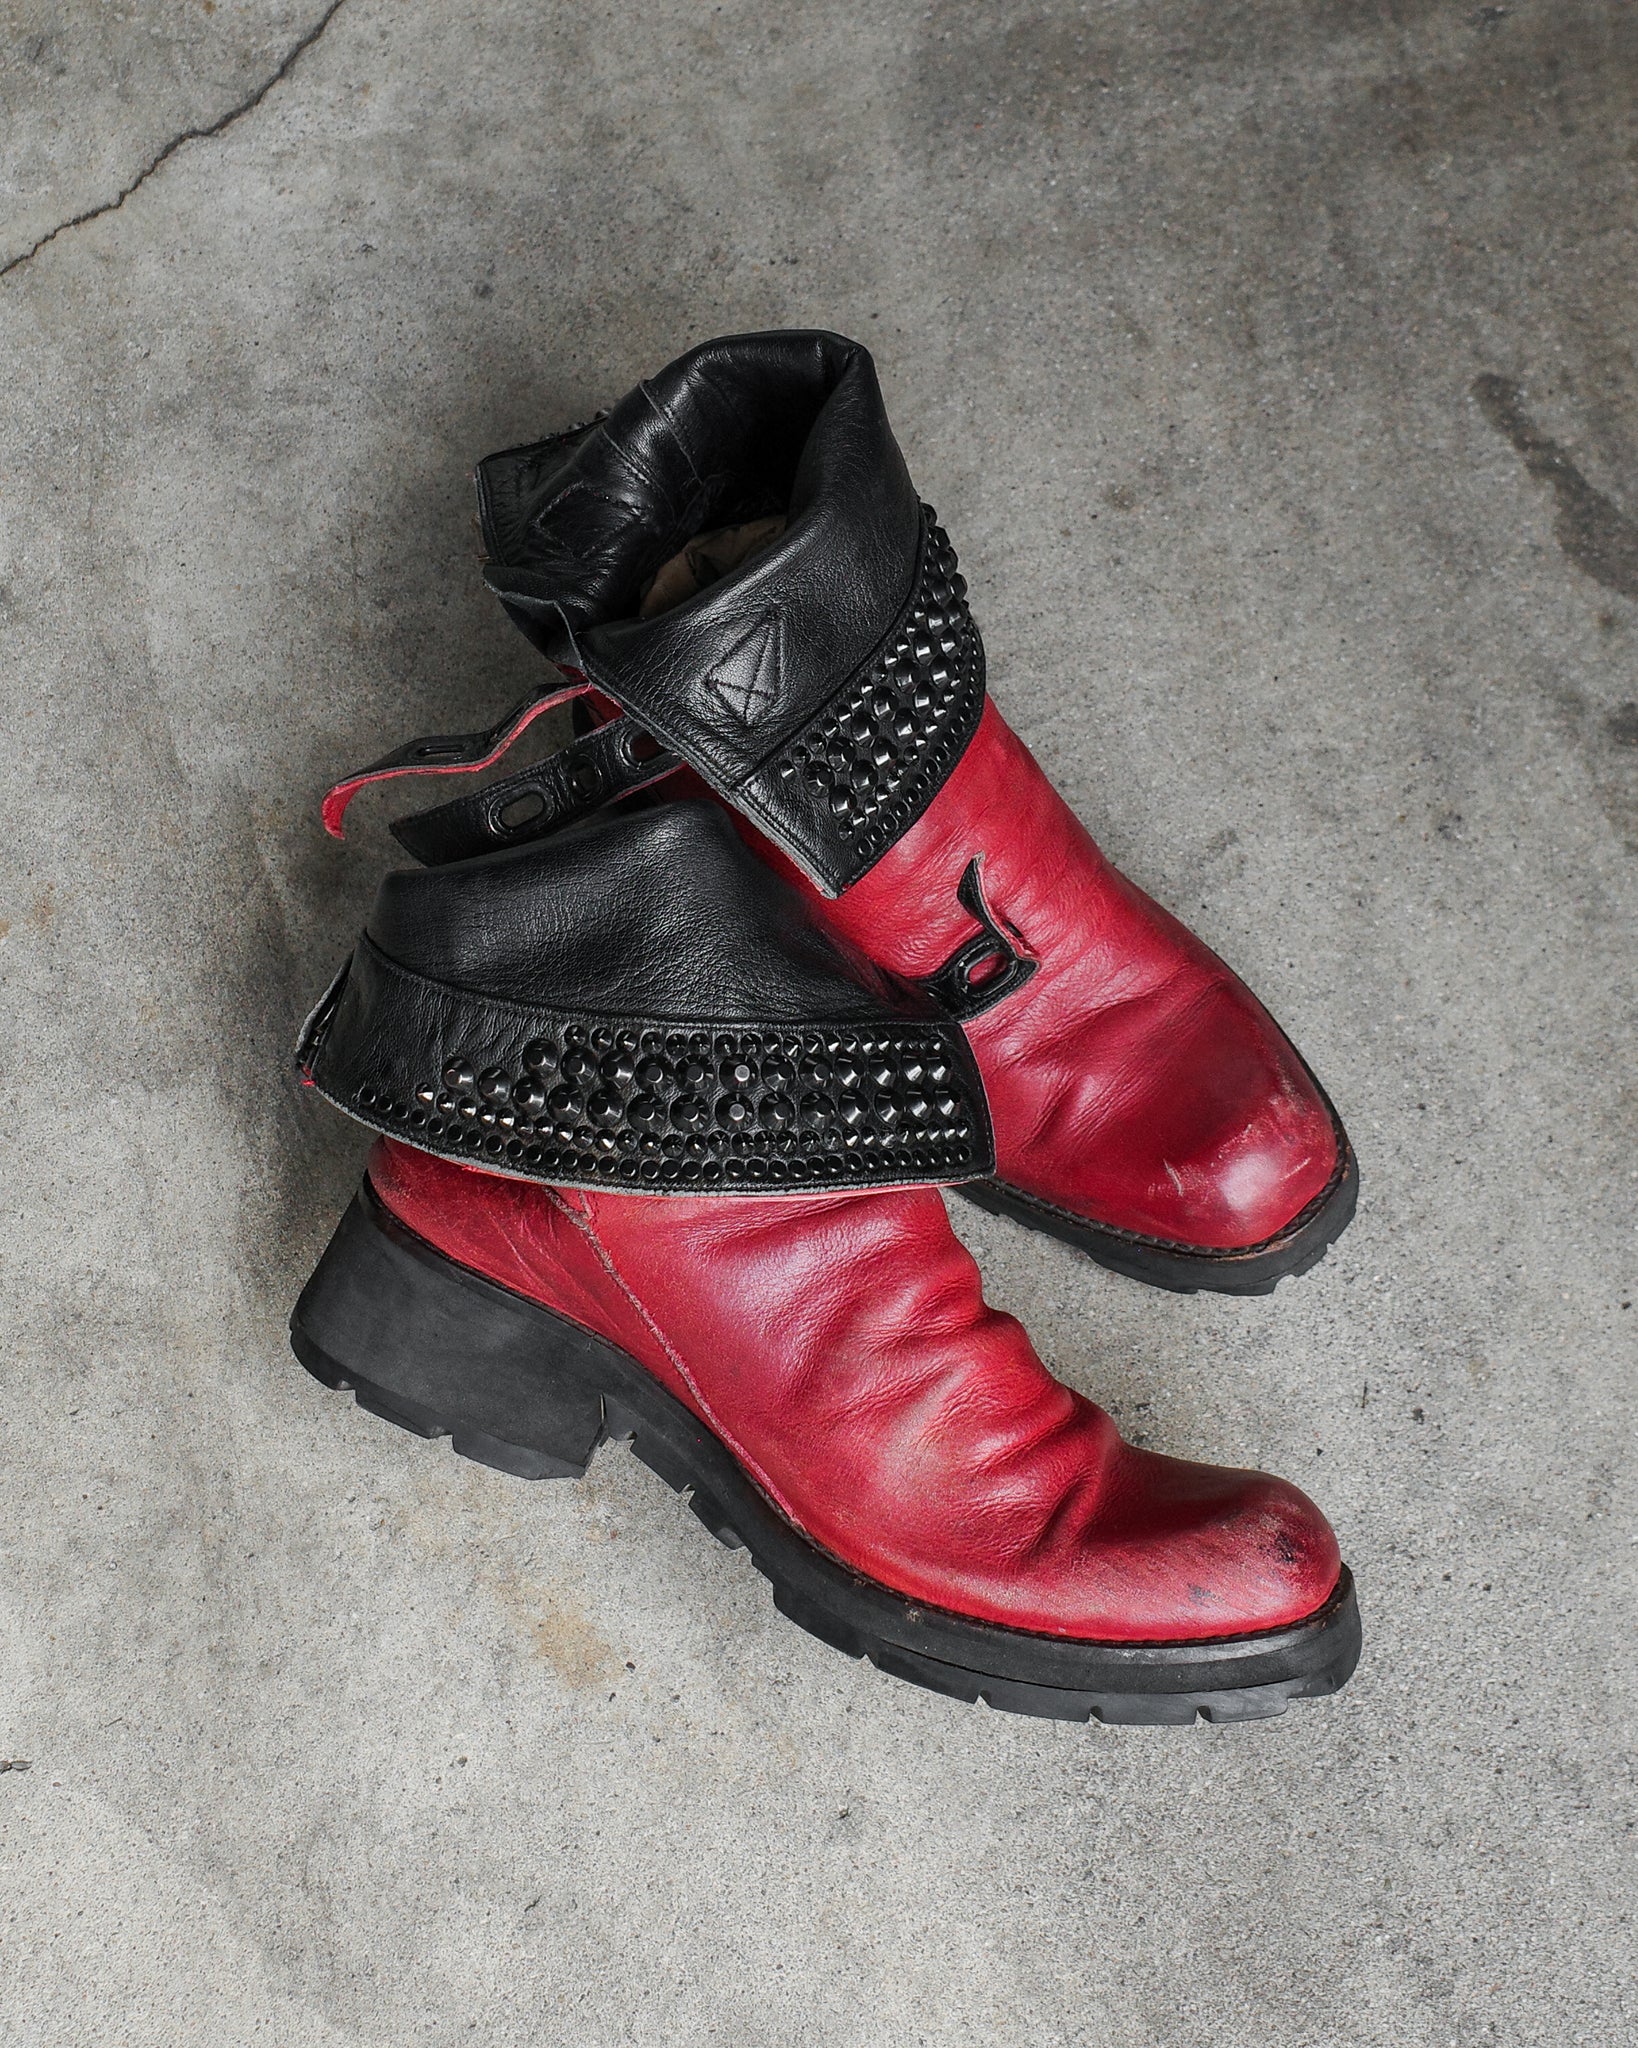 Kmrii Buckle Studded Boots